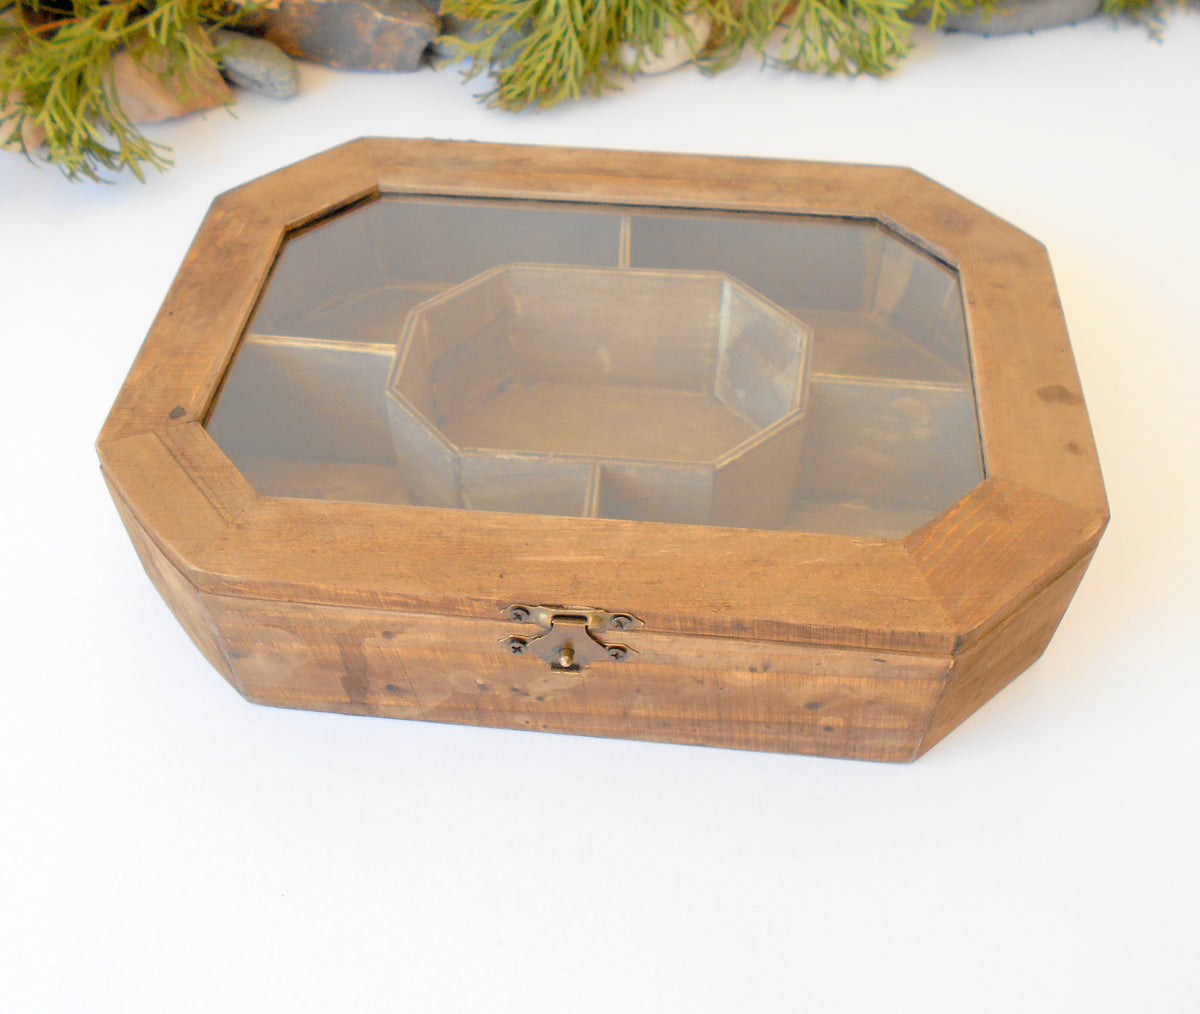 This is a wooden box with a glass display that is made of pinewood and that has metal hinges and closes with a bronze-color closing that may display various things like jewelry, miniatures, crystals, or other small objects of importance to you or your friends. &lt;span data-mce-fragment=&quot;1&quot;&gt;I have colored the box with mordant so that it looks like an old wood vintage box with a mahogany color.&lt;/span&gt;